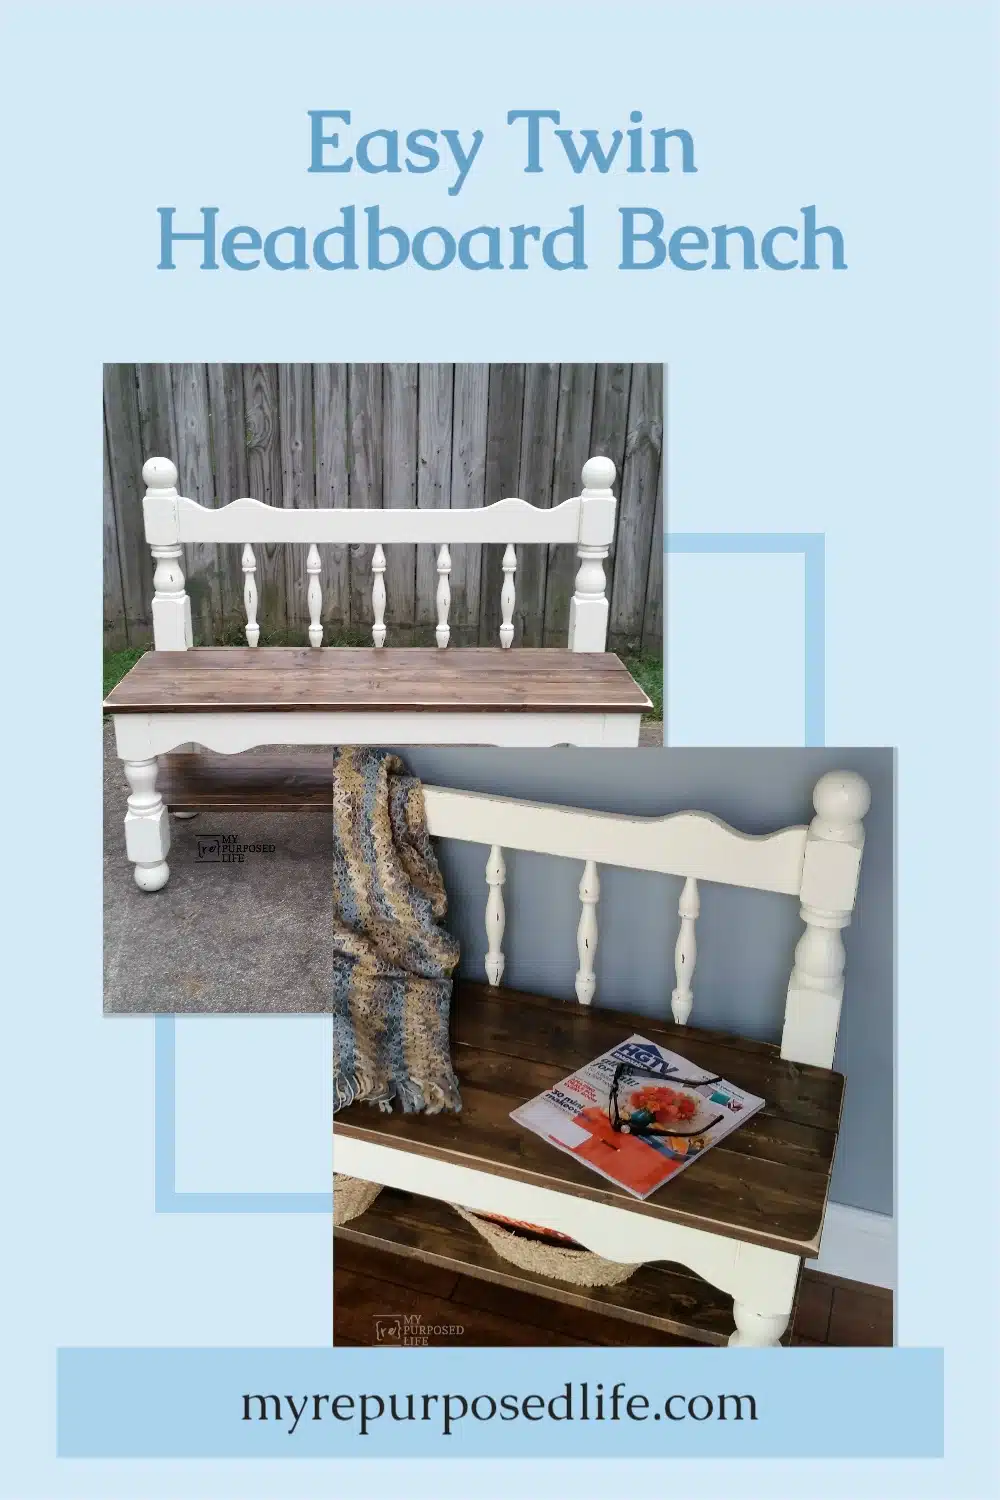 White Twin headboard bench. Easy bench tutorial so you can make one this weekend. Tips on distressing and more. #MyRepurposedLife #repurposed #furniture #headboard #bench #twinbed via @repurposedlife